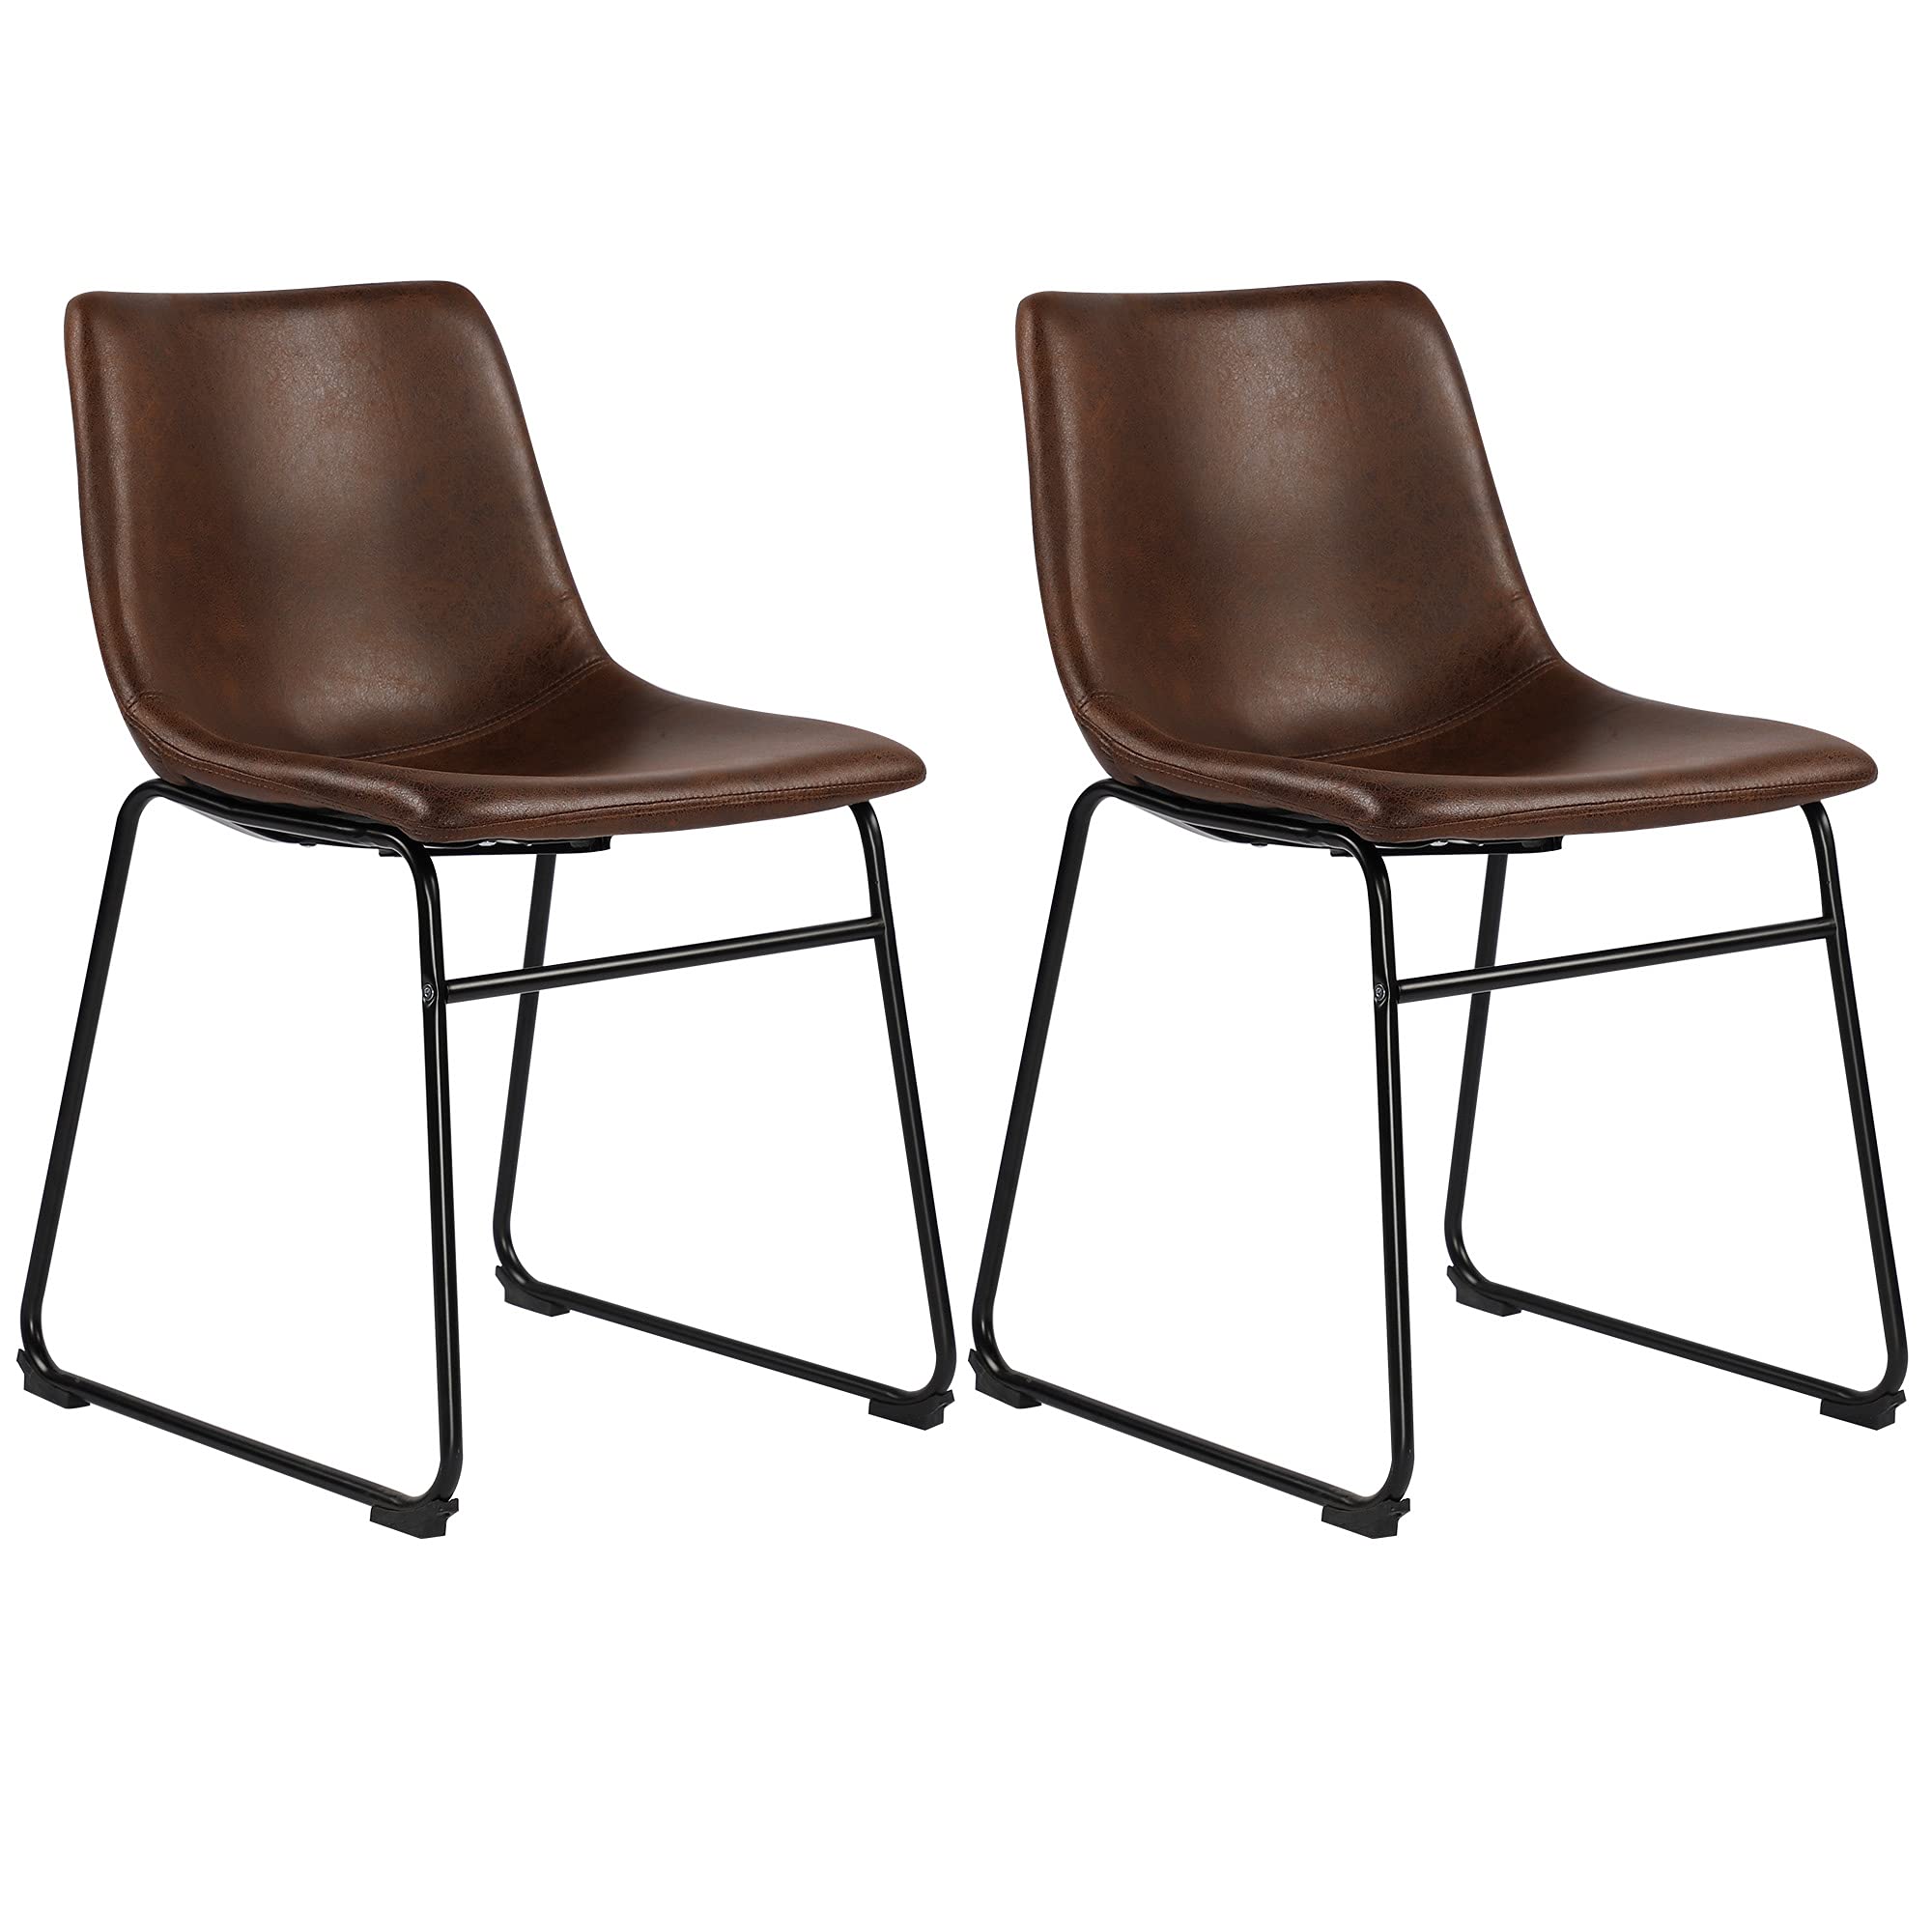 Mid Century Style Dining Room Chair, Antique Retro Living Room Armless Bar Chairs with Faux Leather seat and Metal Base, Set of 2 (Brown)